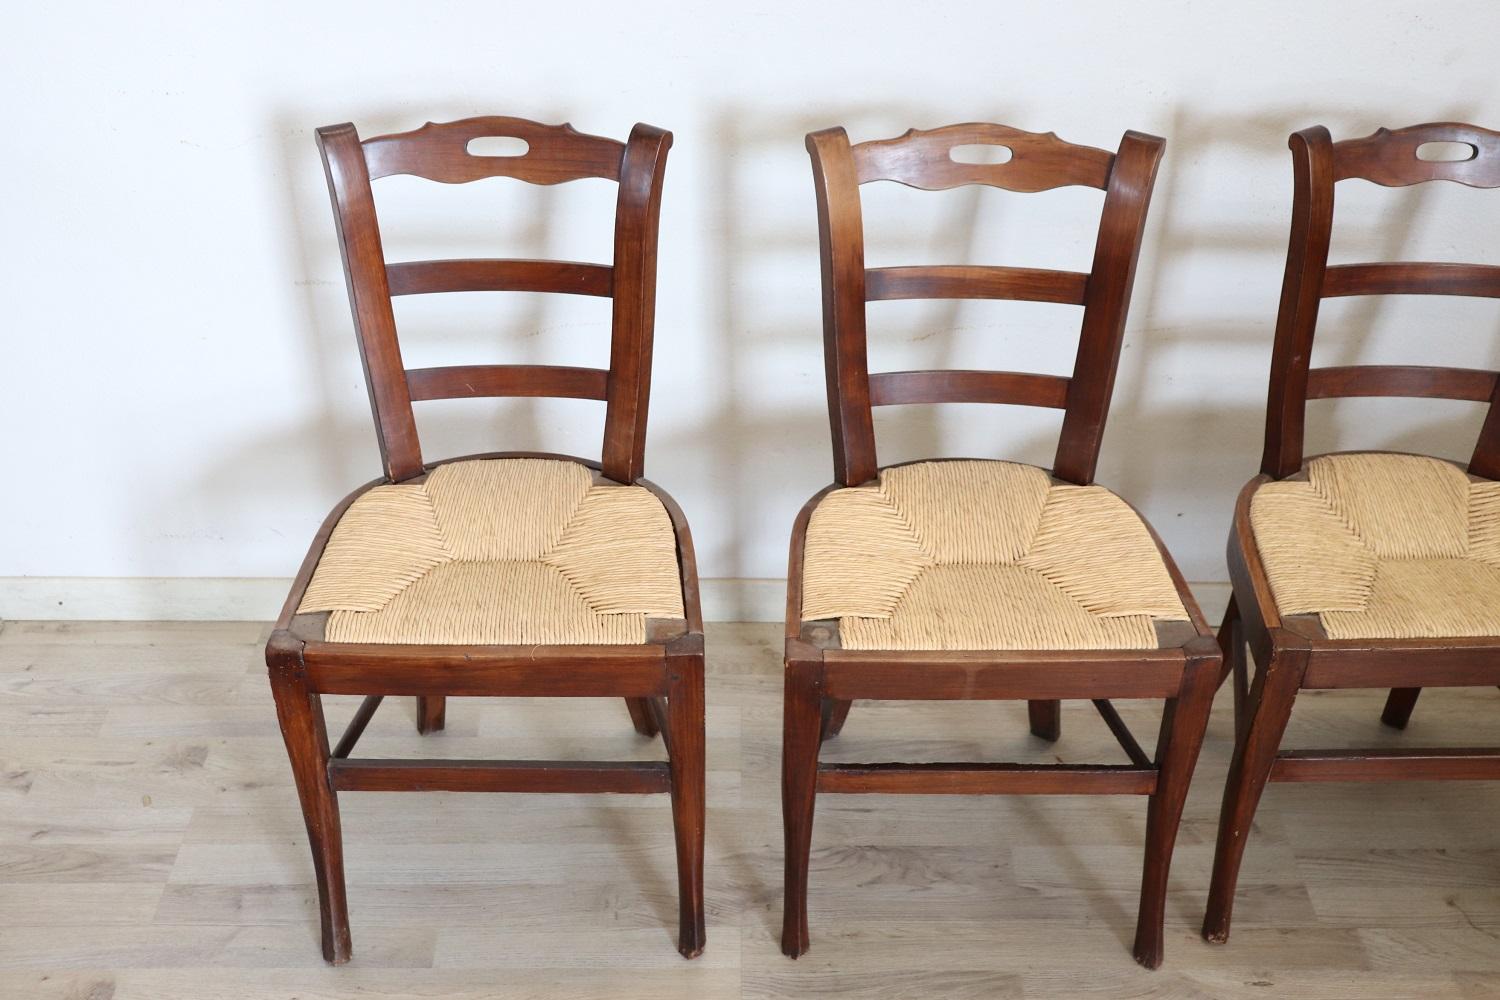 19th Century dining room set of four antique chairs in solid cherry wood. The chairs are very elegant with very slender and solid moving legs. The seat is wide and comfortable in rustic straw. The chairs are in perfect condition ready to be used in